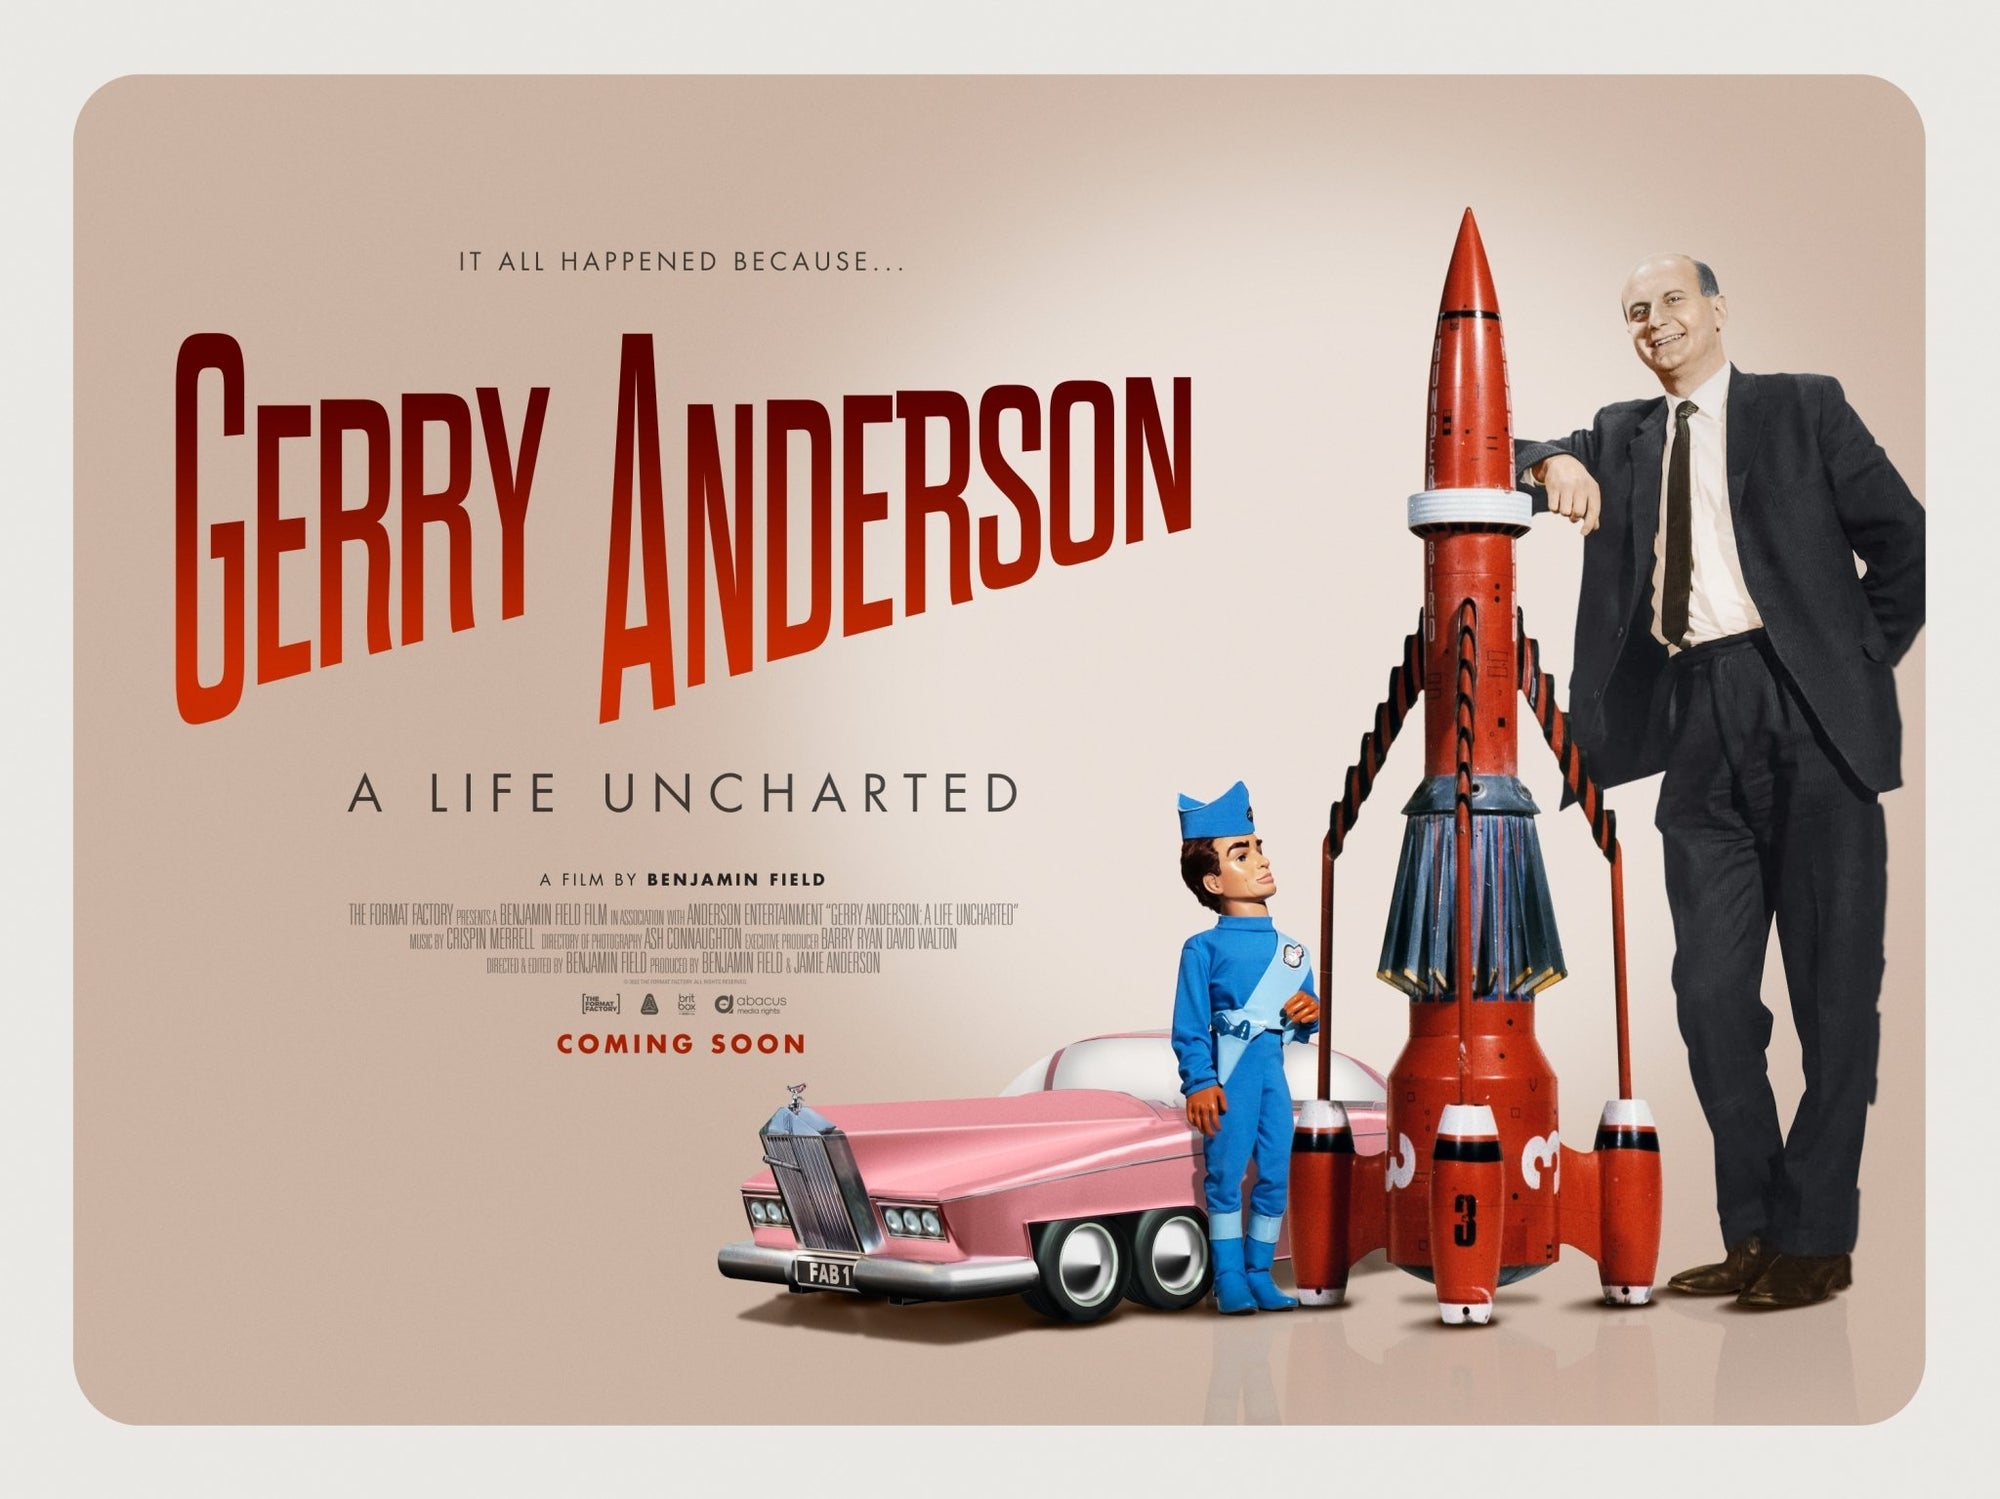 First Look - New Doc Teaser - The Gerry Anderson Store